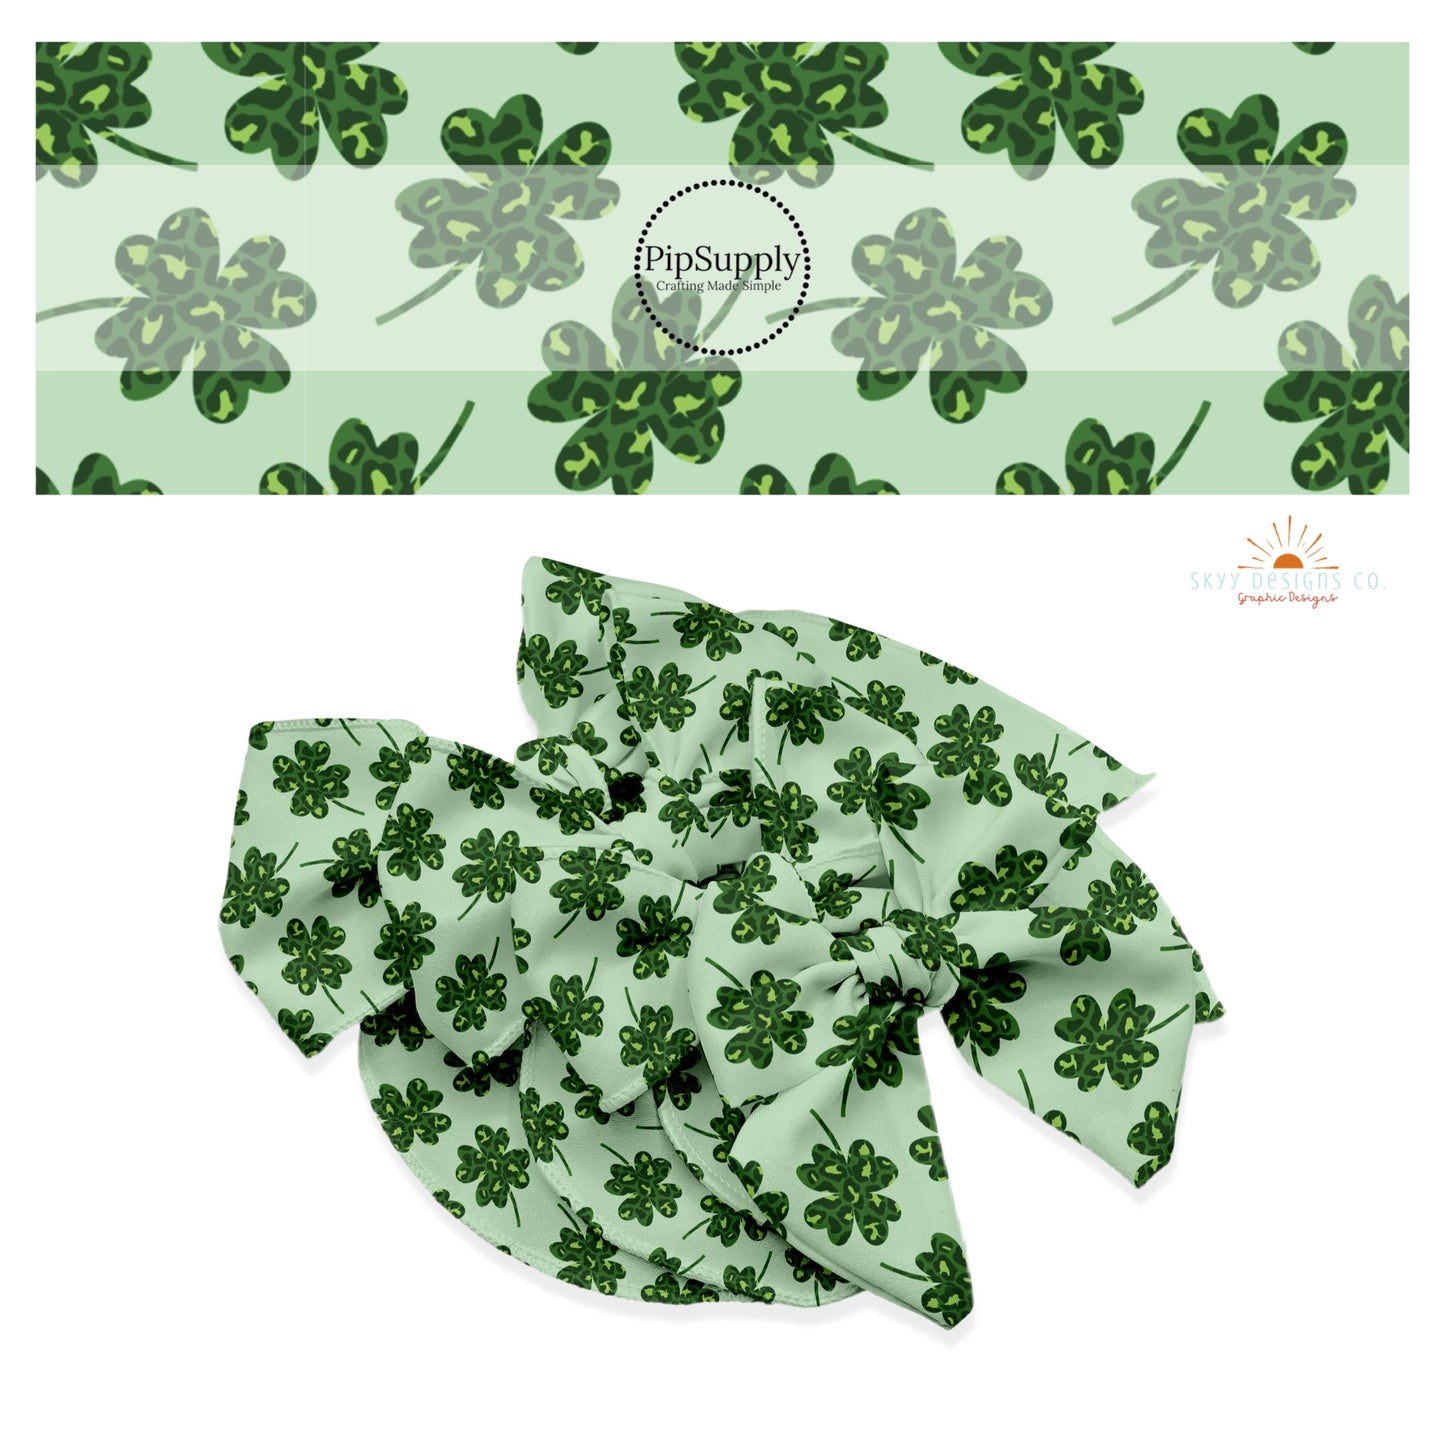 4 leaf clovers that have dark green and light green leopard spots on a light green bow strip